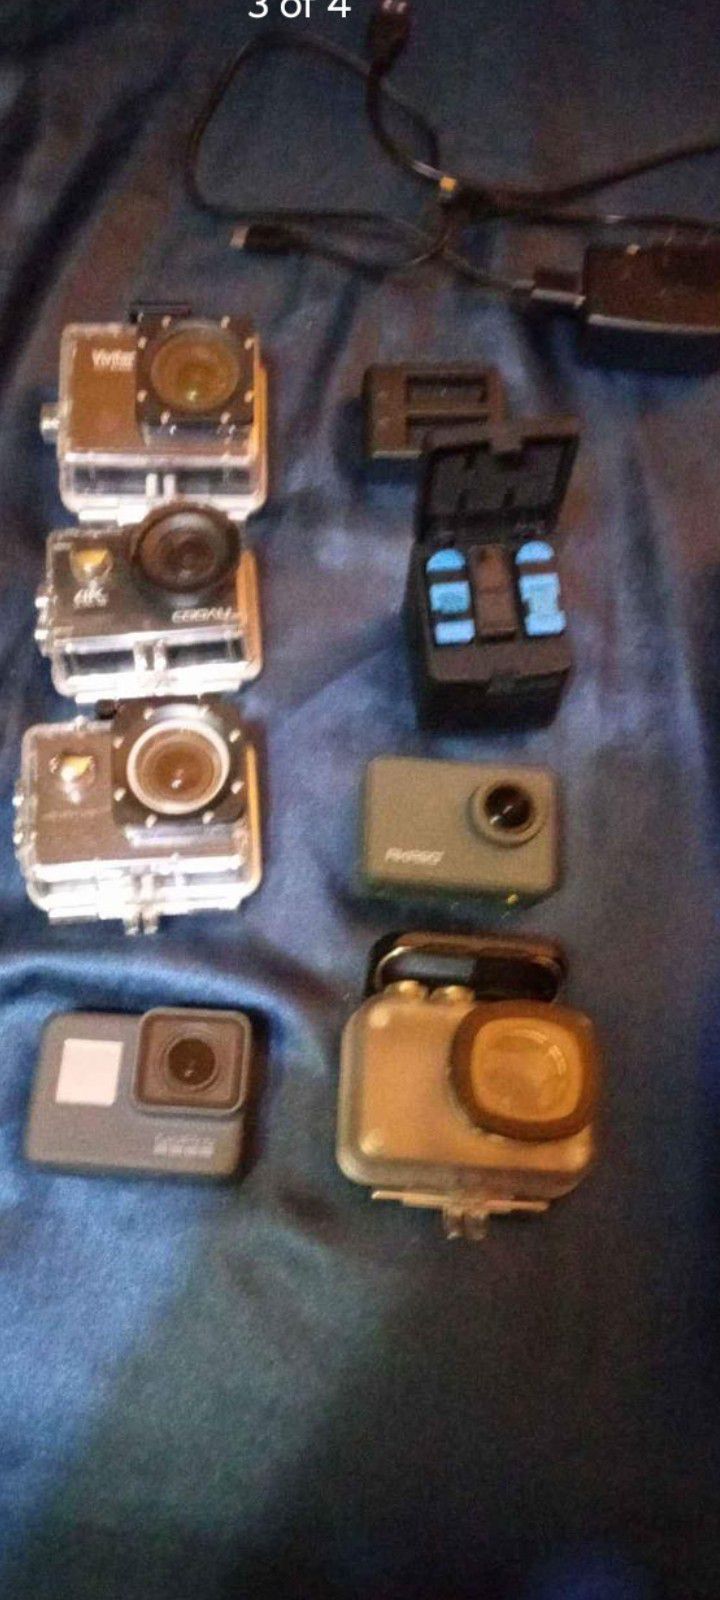 GoPro 5 And 4 Other Cameras